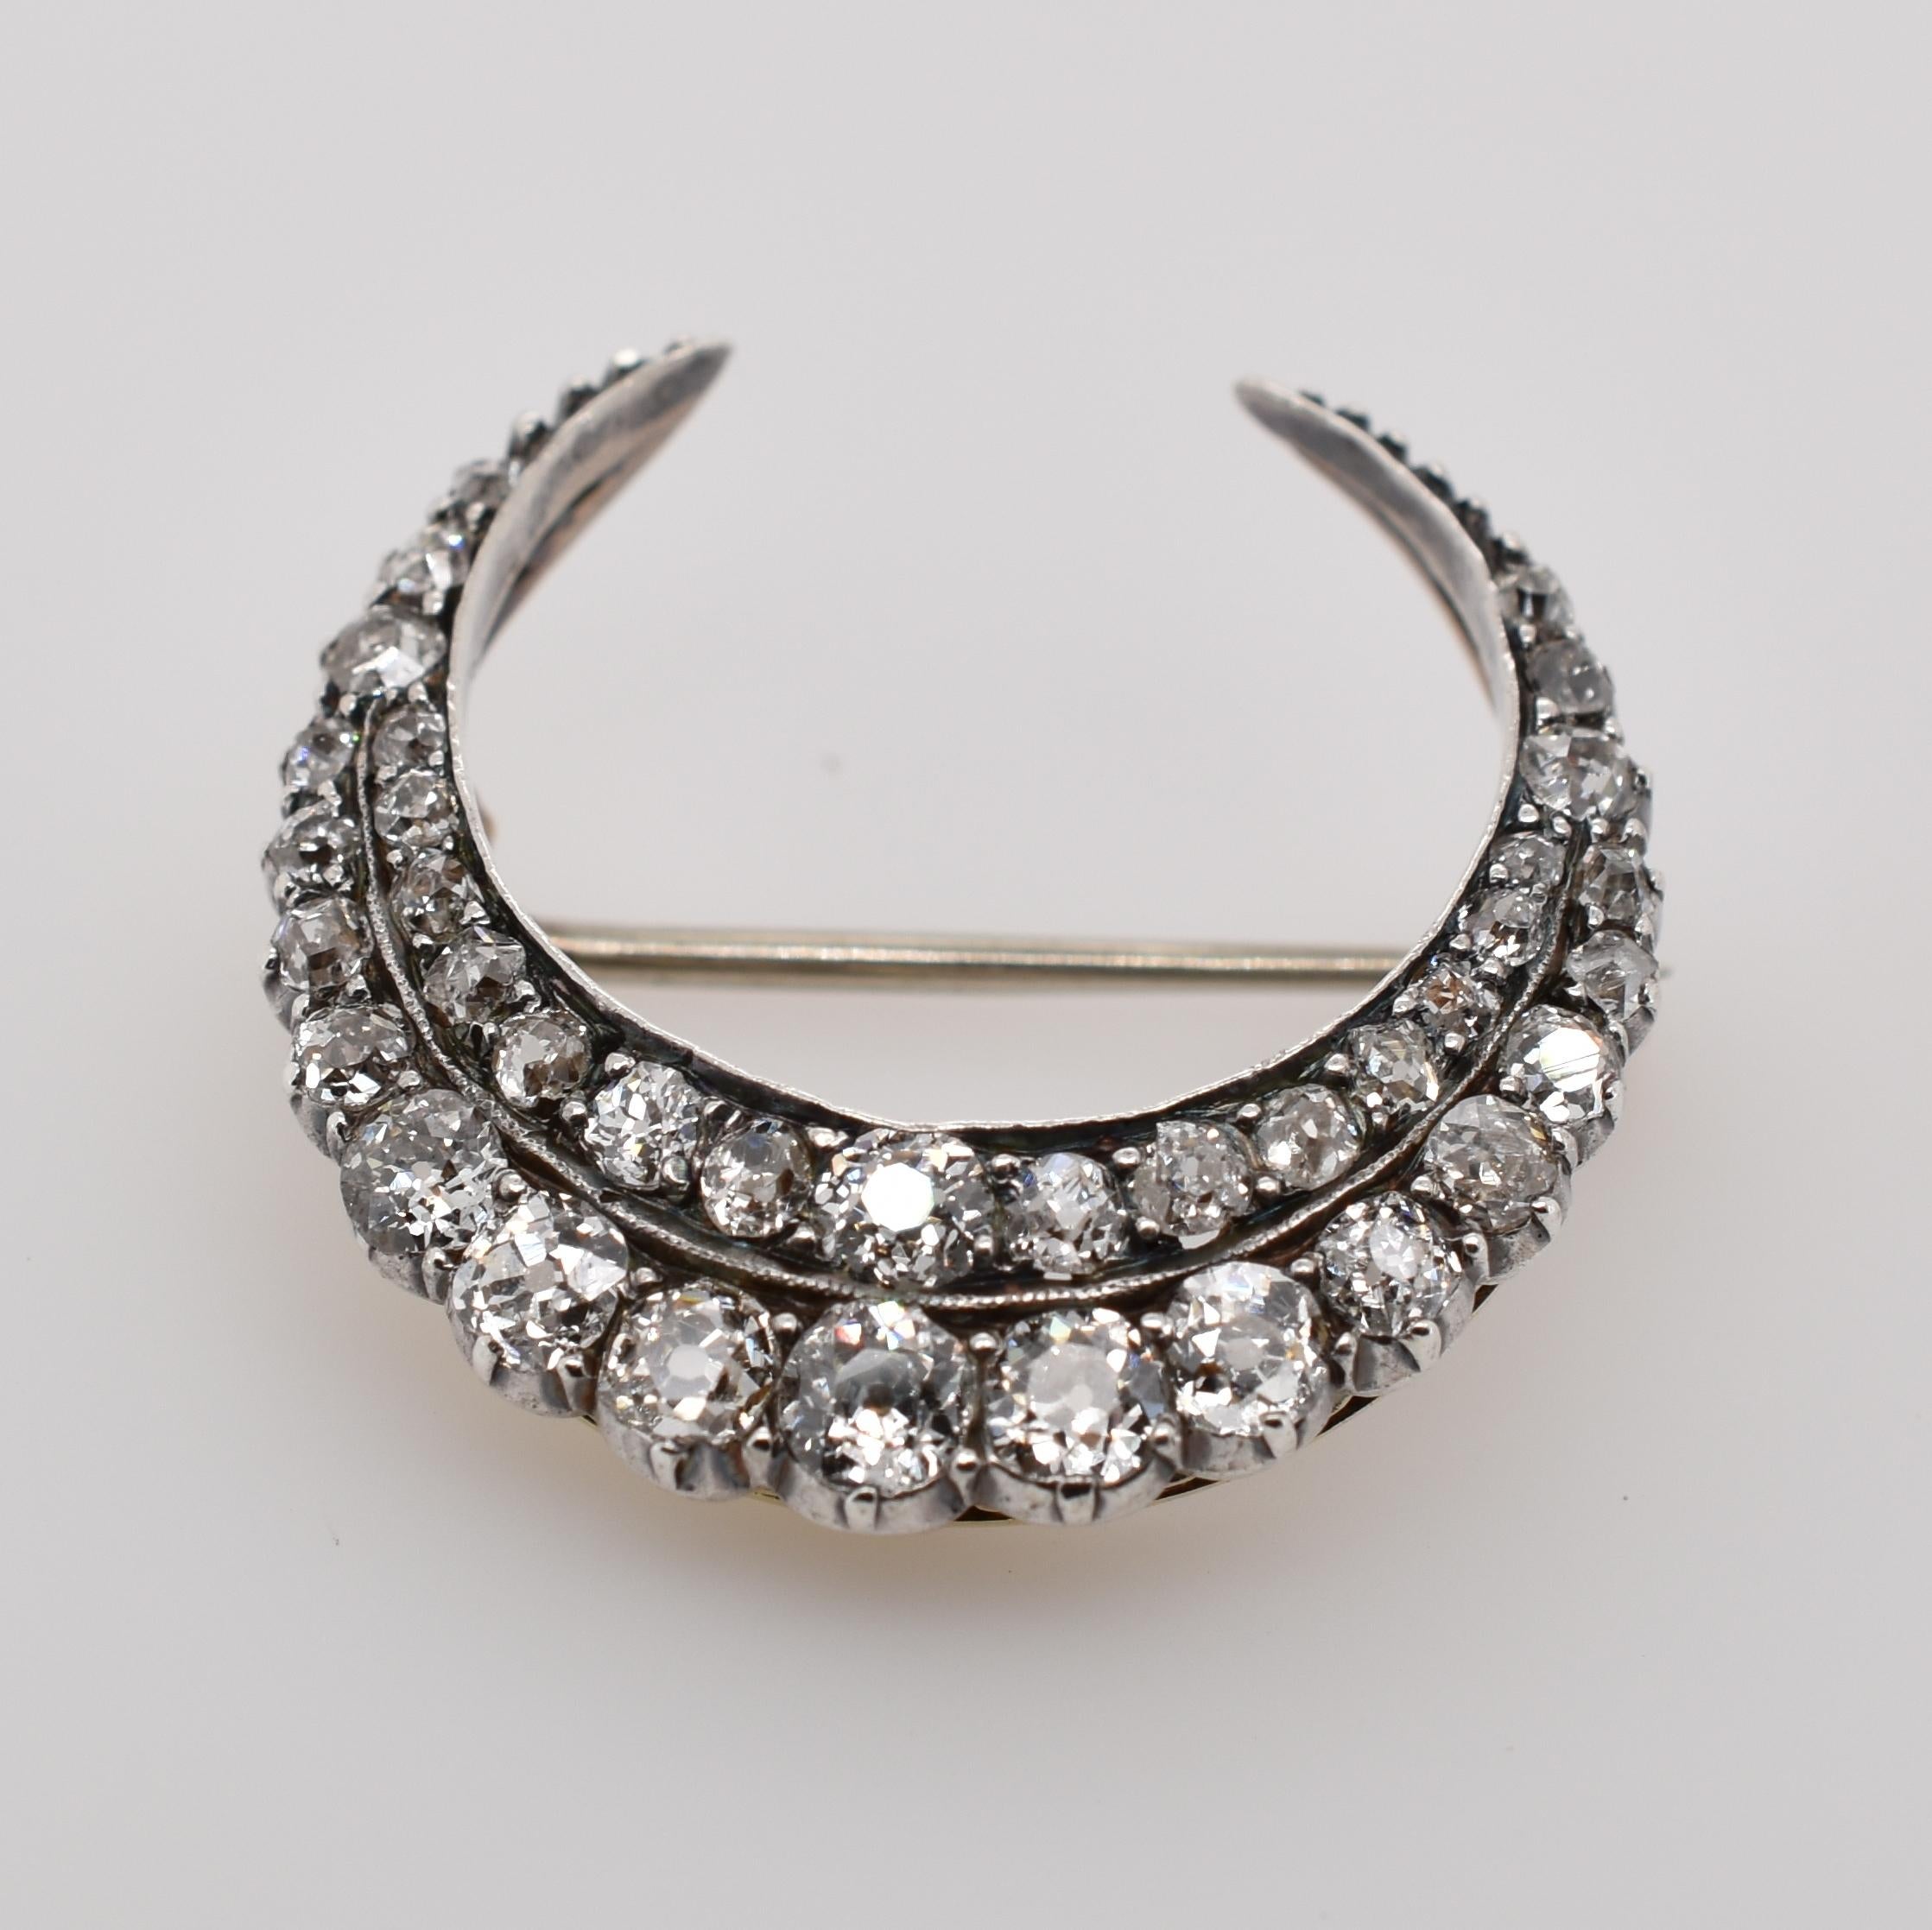 18ct white gold and sterling silver antique old cut diamond crecent shaped brooch. 36 old cut diamonds totalling 1.40ct. 